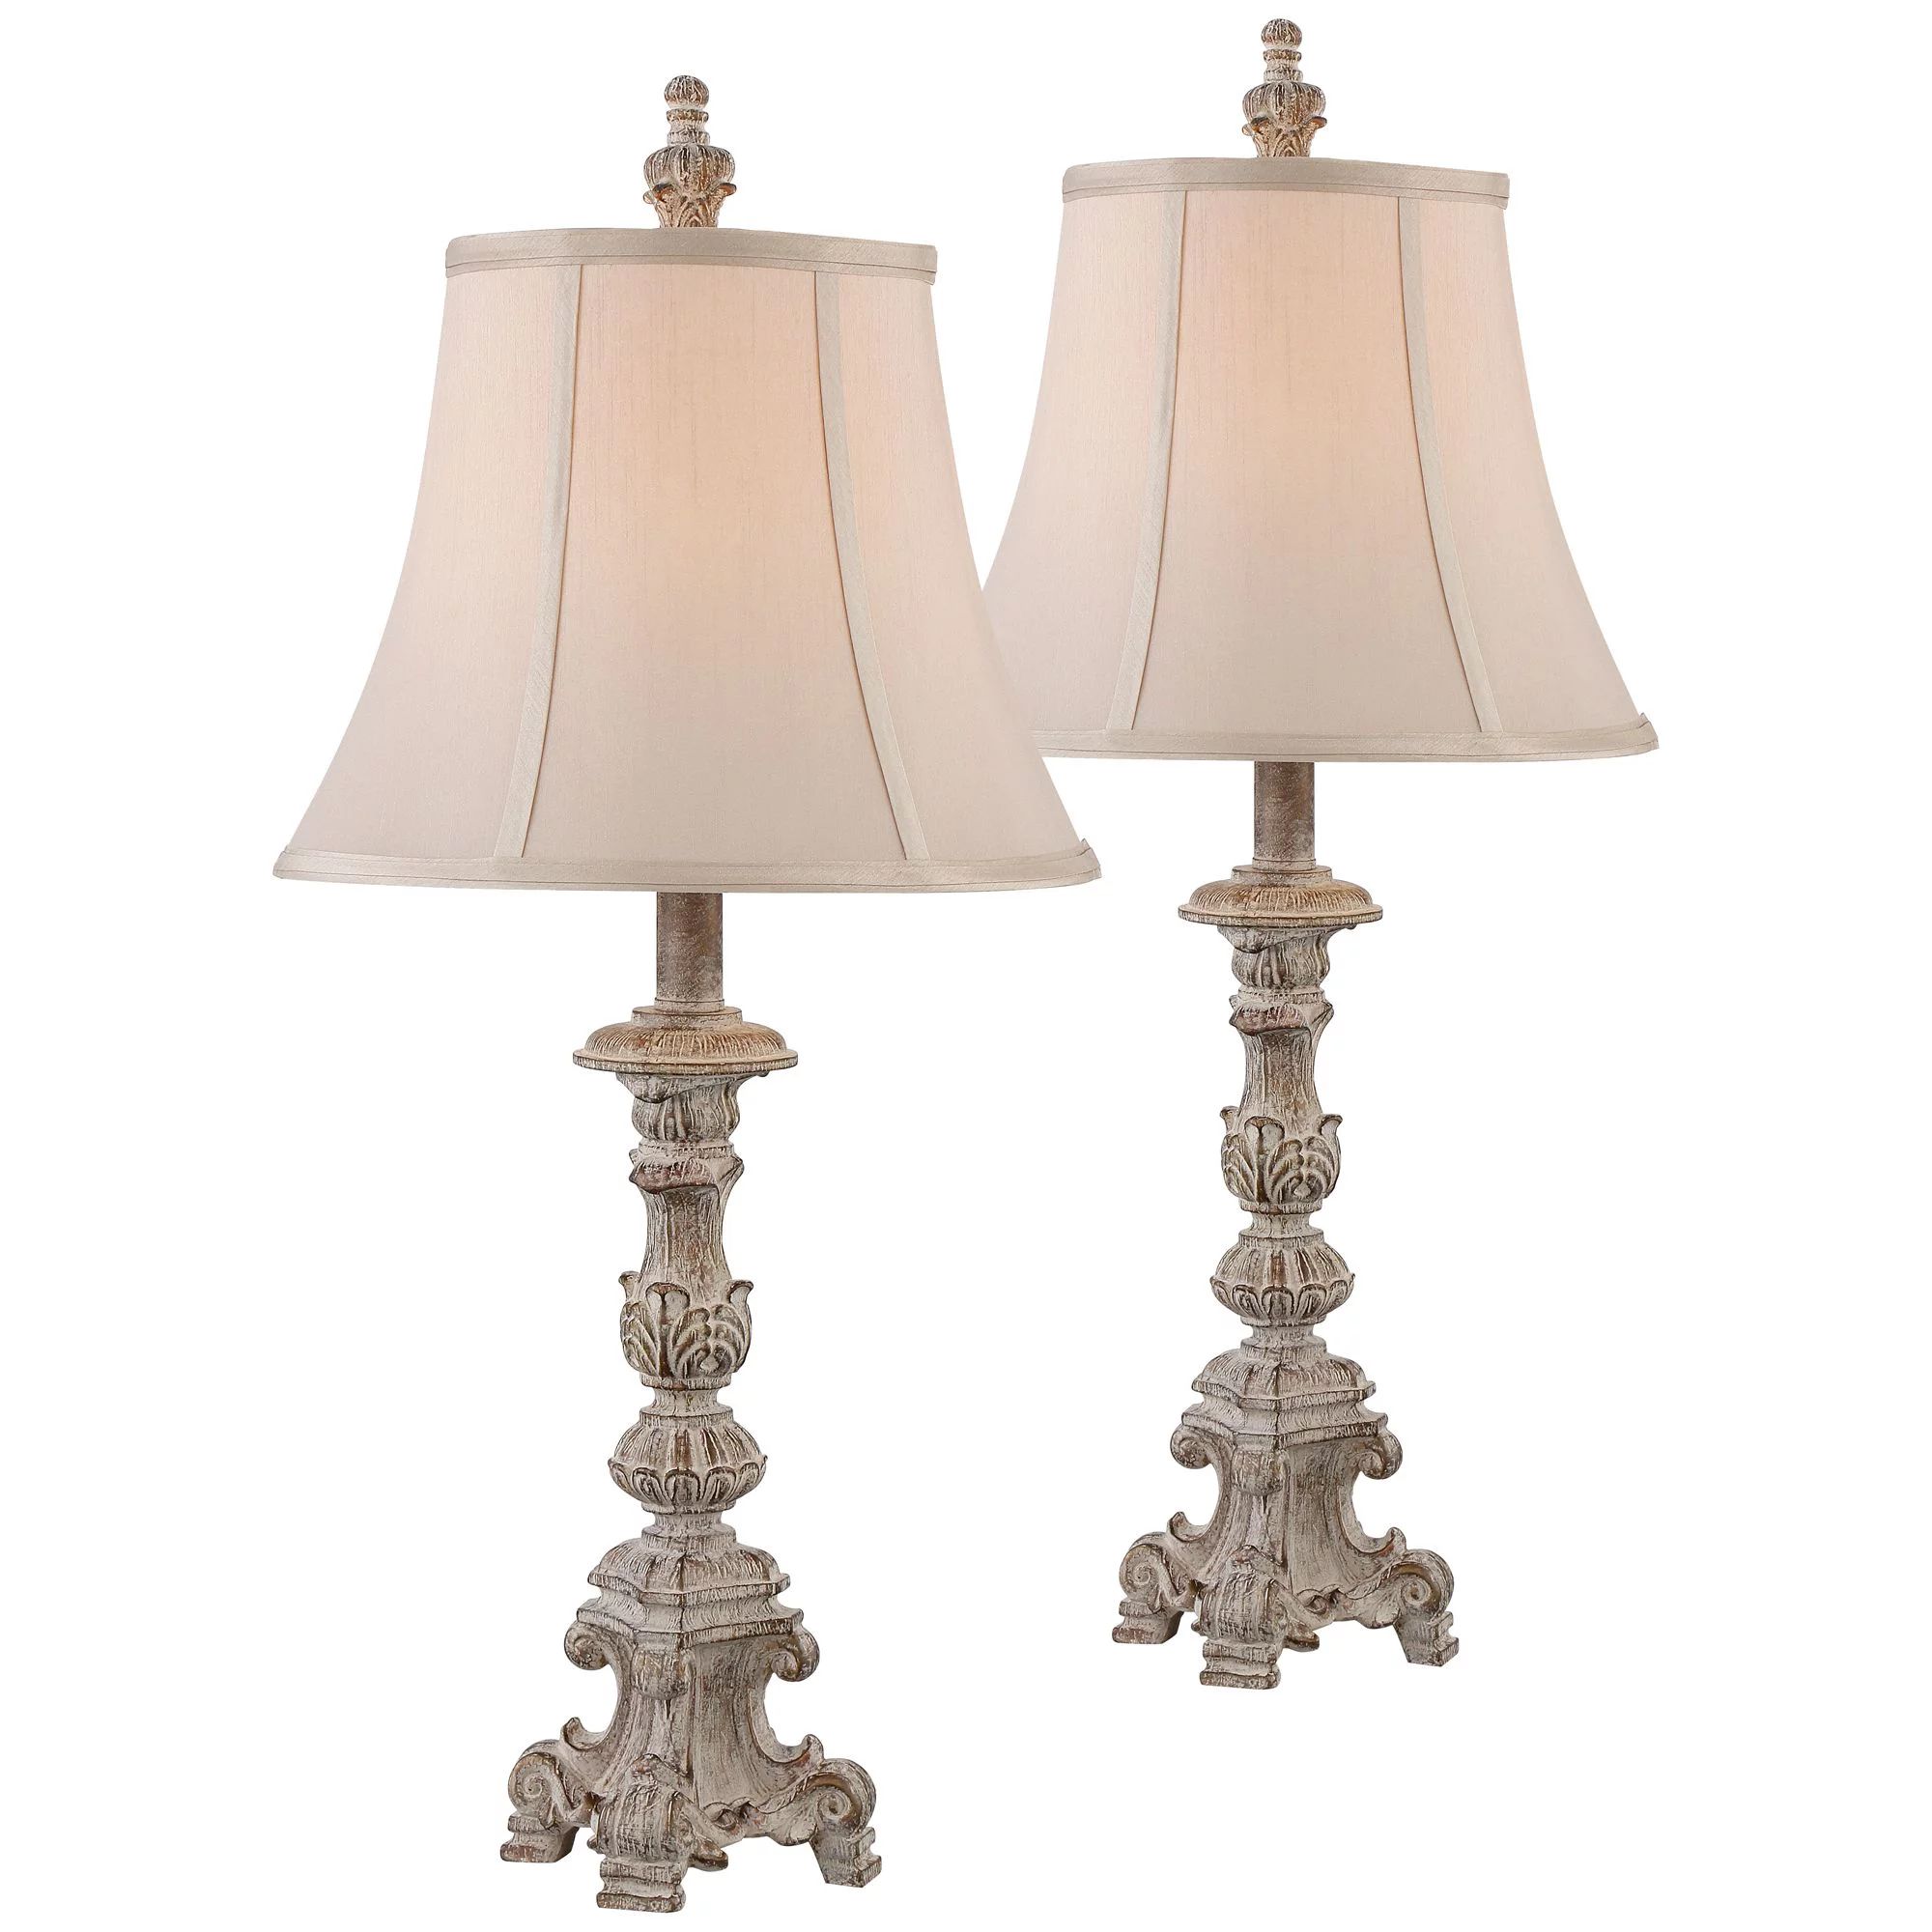 Regency Hill Shabby Chic Table Lamps Set of 2 White Washed Candlestick Bell Shade for Living Room... | Walmart (US)